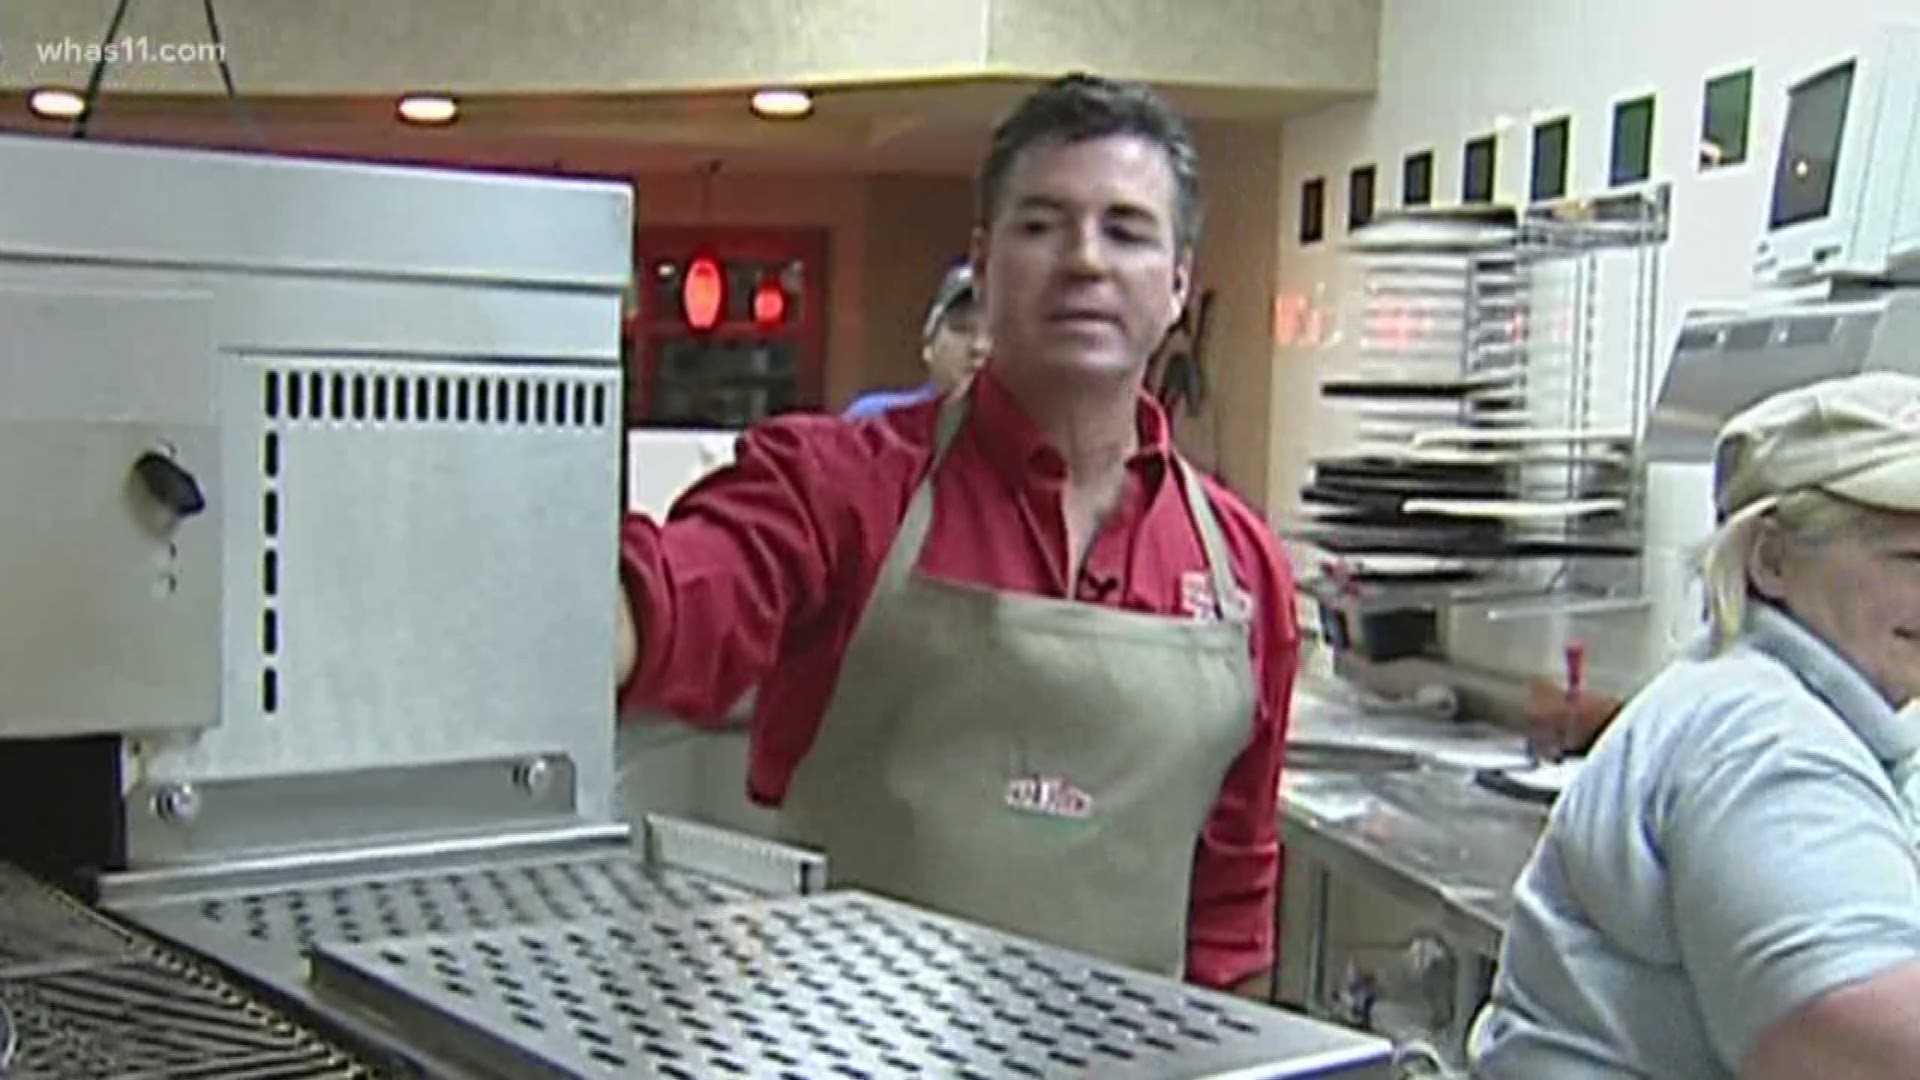 Overnight John Schnatter stepped down as Chairman of the company he founded, it came just hours after apologizing for using a racial slur in a conference call.